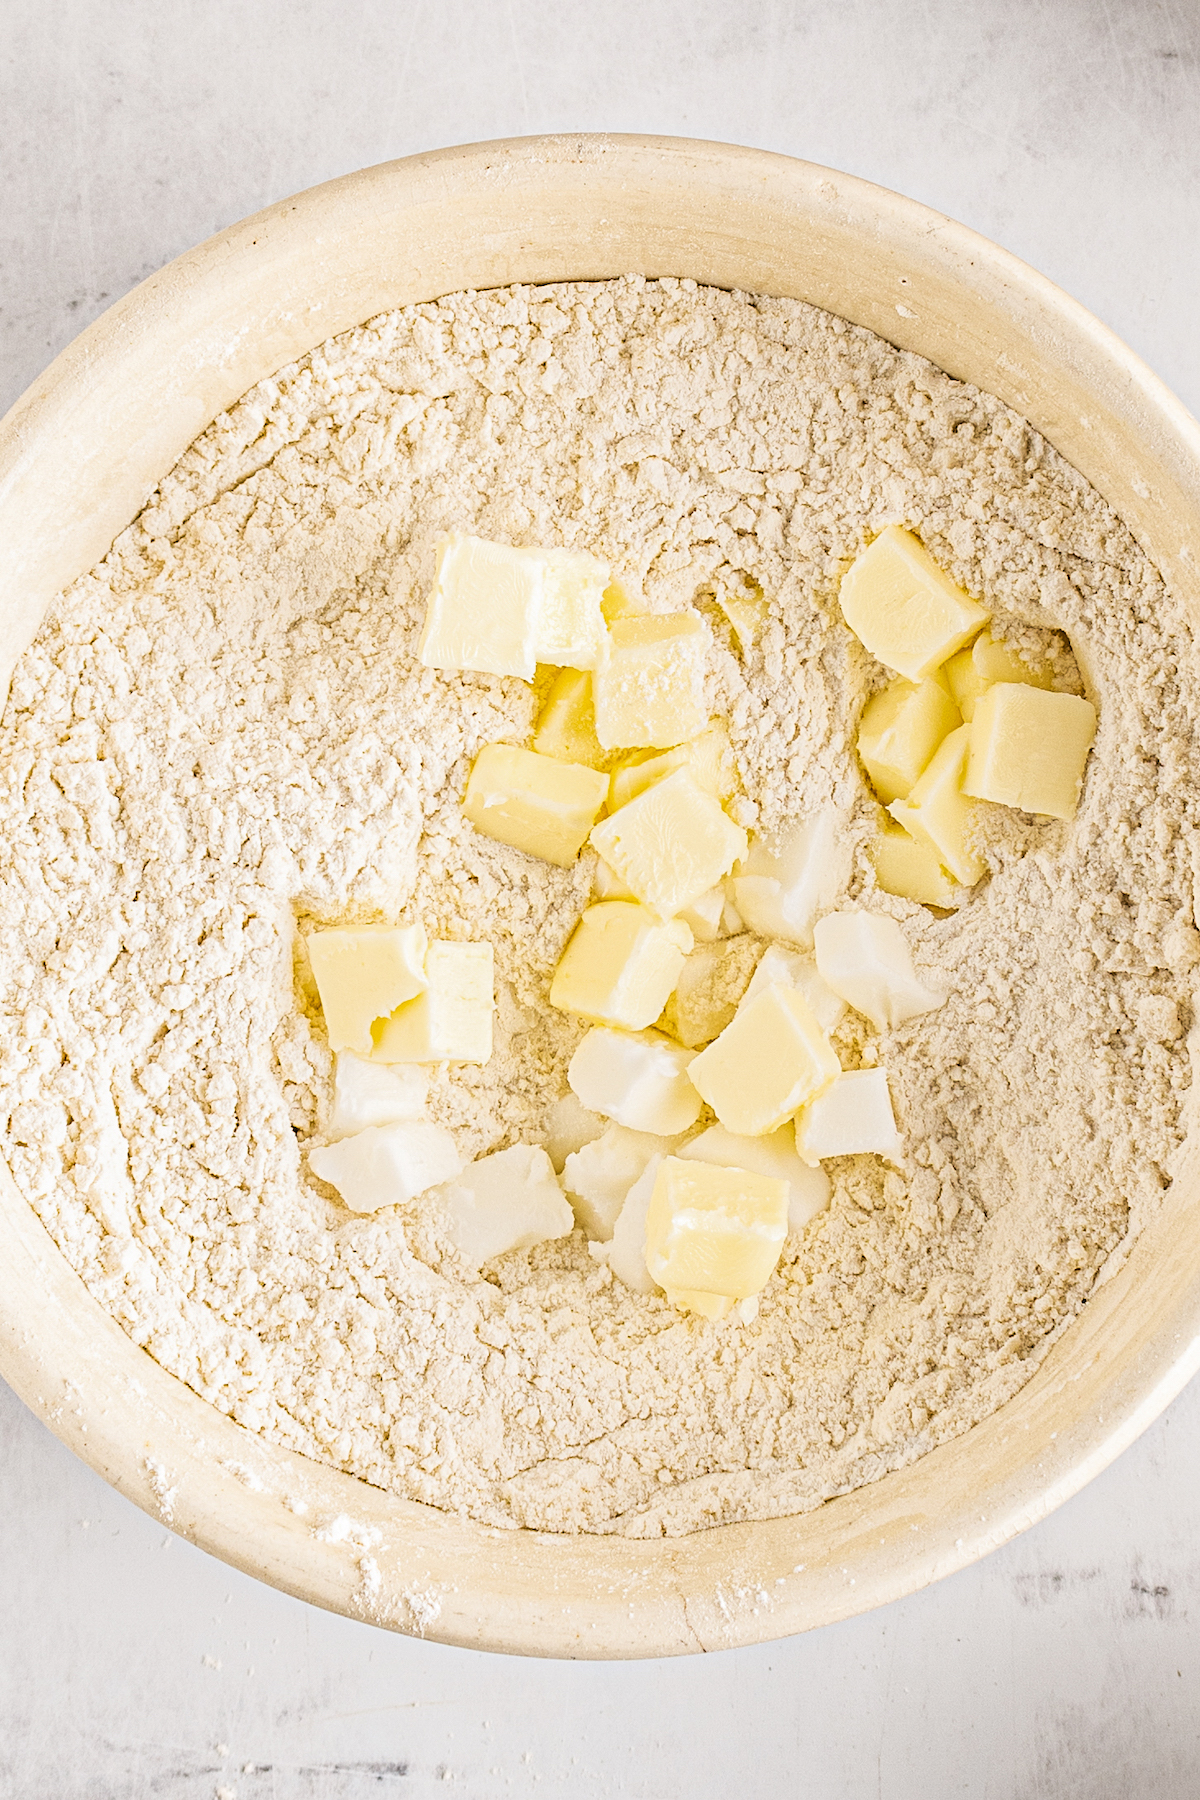 Butter and shortening in a bowl of dry baking ingredients.